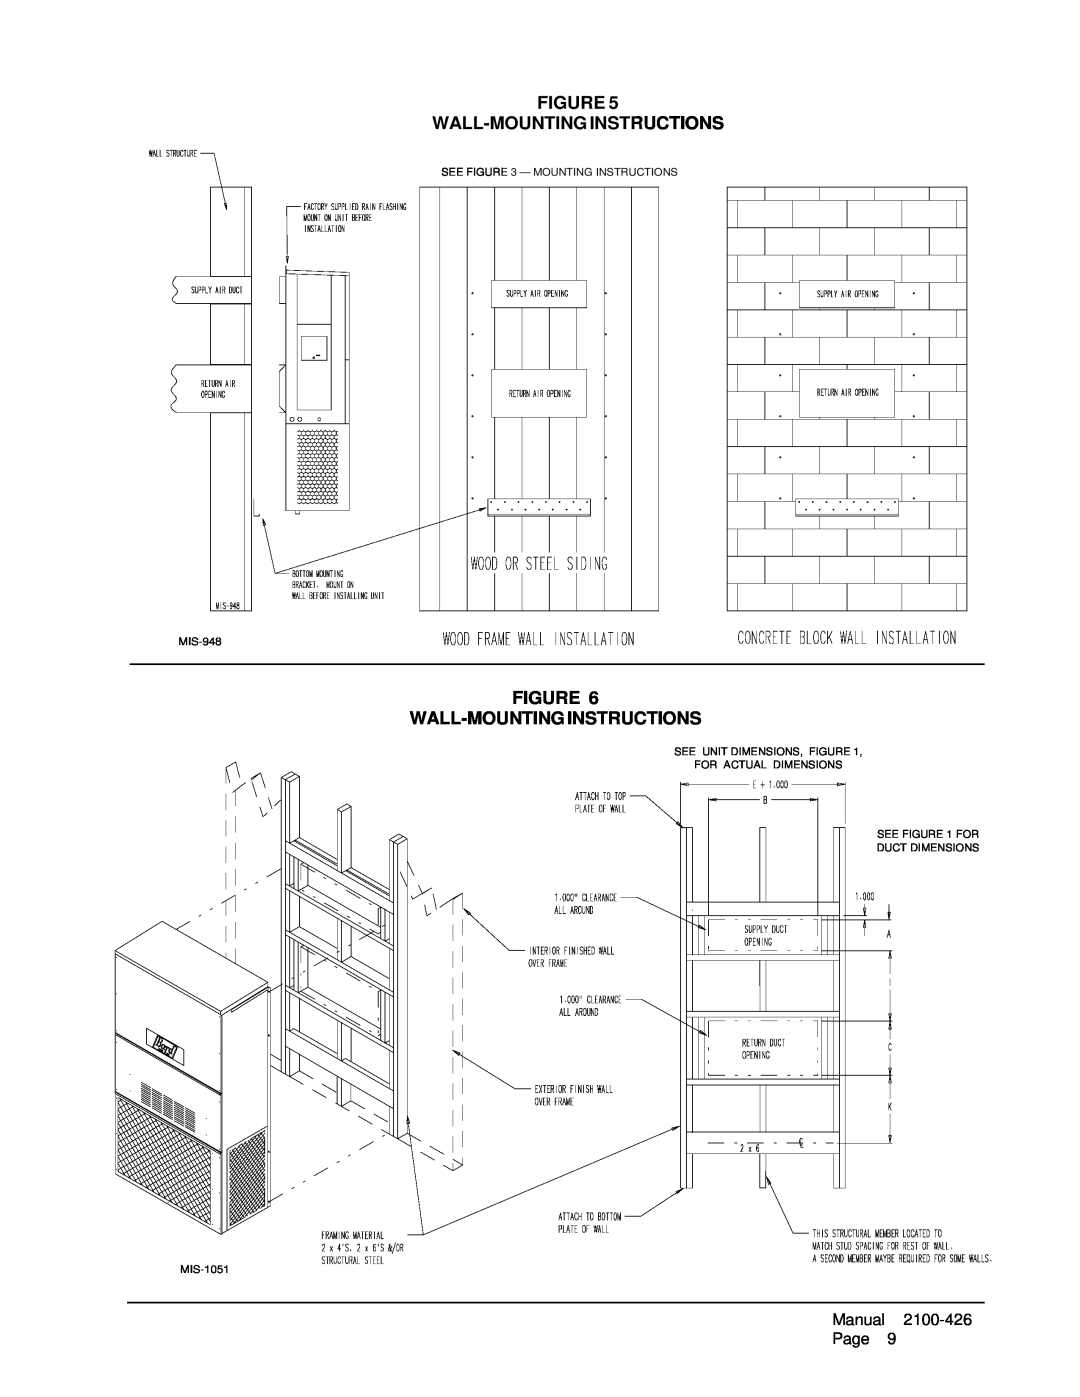 Bard WL702-A Figure Wall-Mountinginstructions, SEE - MOUNTING INSTRUCTIONS MIS-948, SEE FOR DUCT DIMENSIONS MIS-1051 